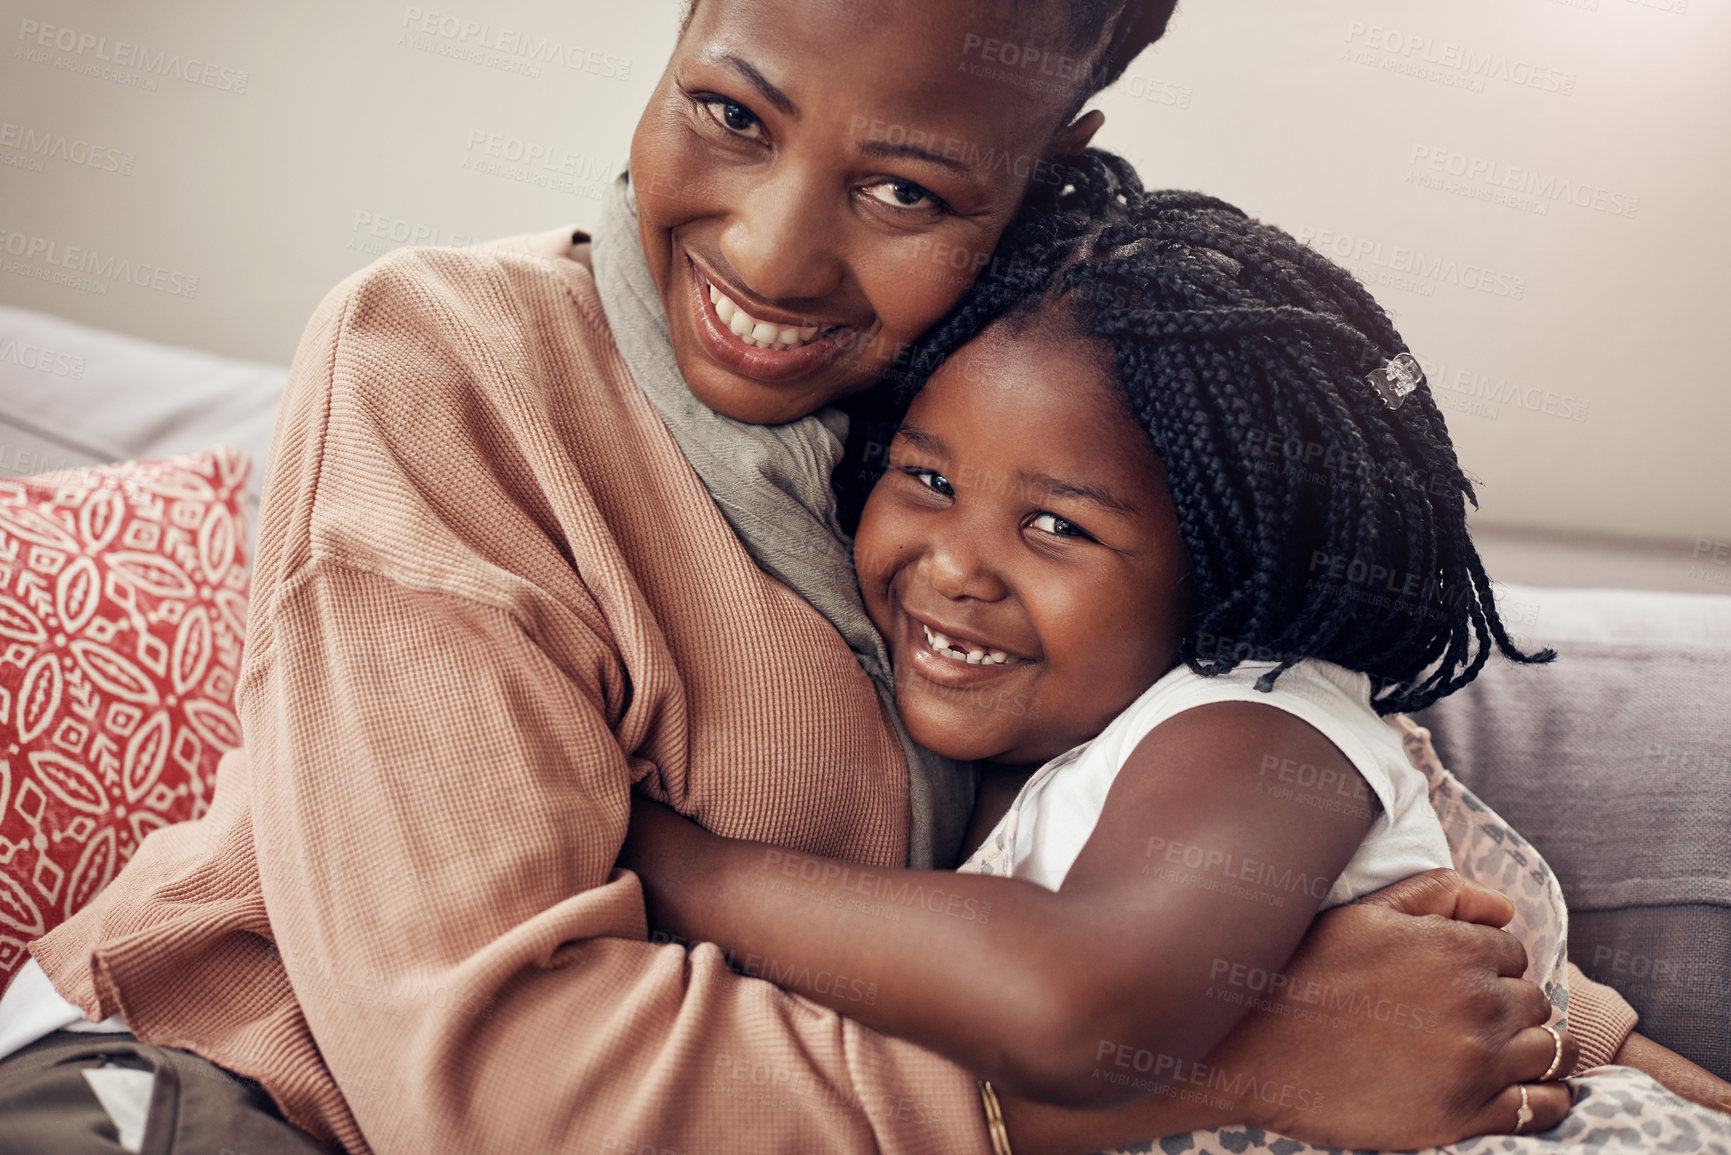 Buy stock photo Portrait of an adorable mother and daughter bonding together at home